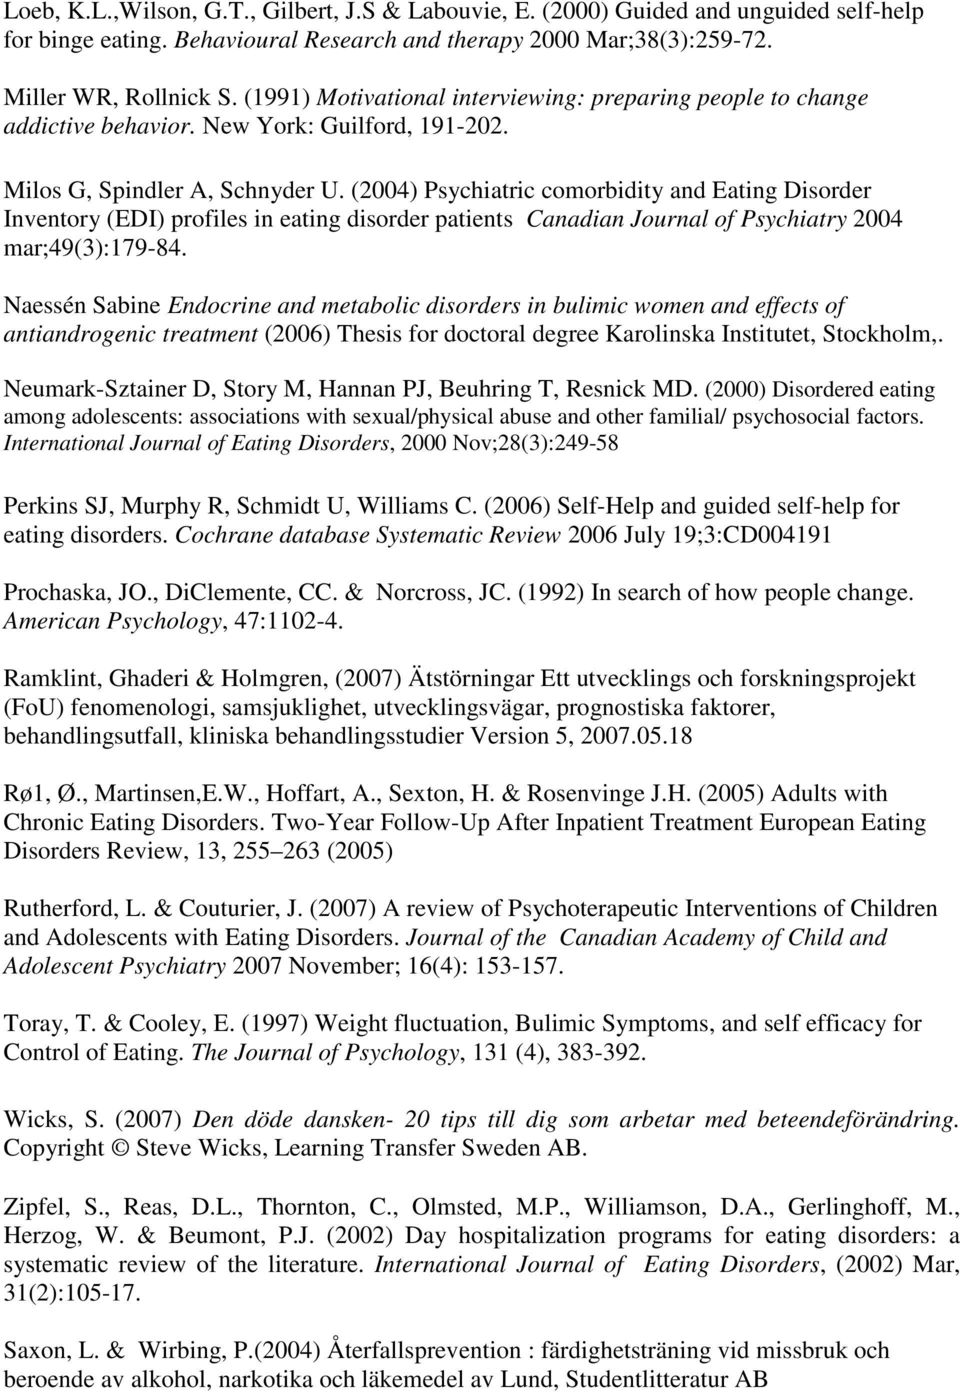 (2004) Psychiatric comorbidity and Eating Disorder Inventory (EDI) profiles in eating disorder patients Canadian Journal of Psychiatry 2004 mar;49(3):179-84.